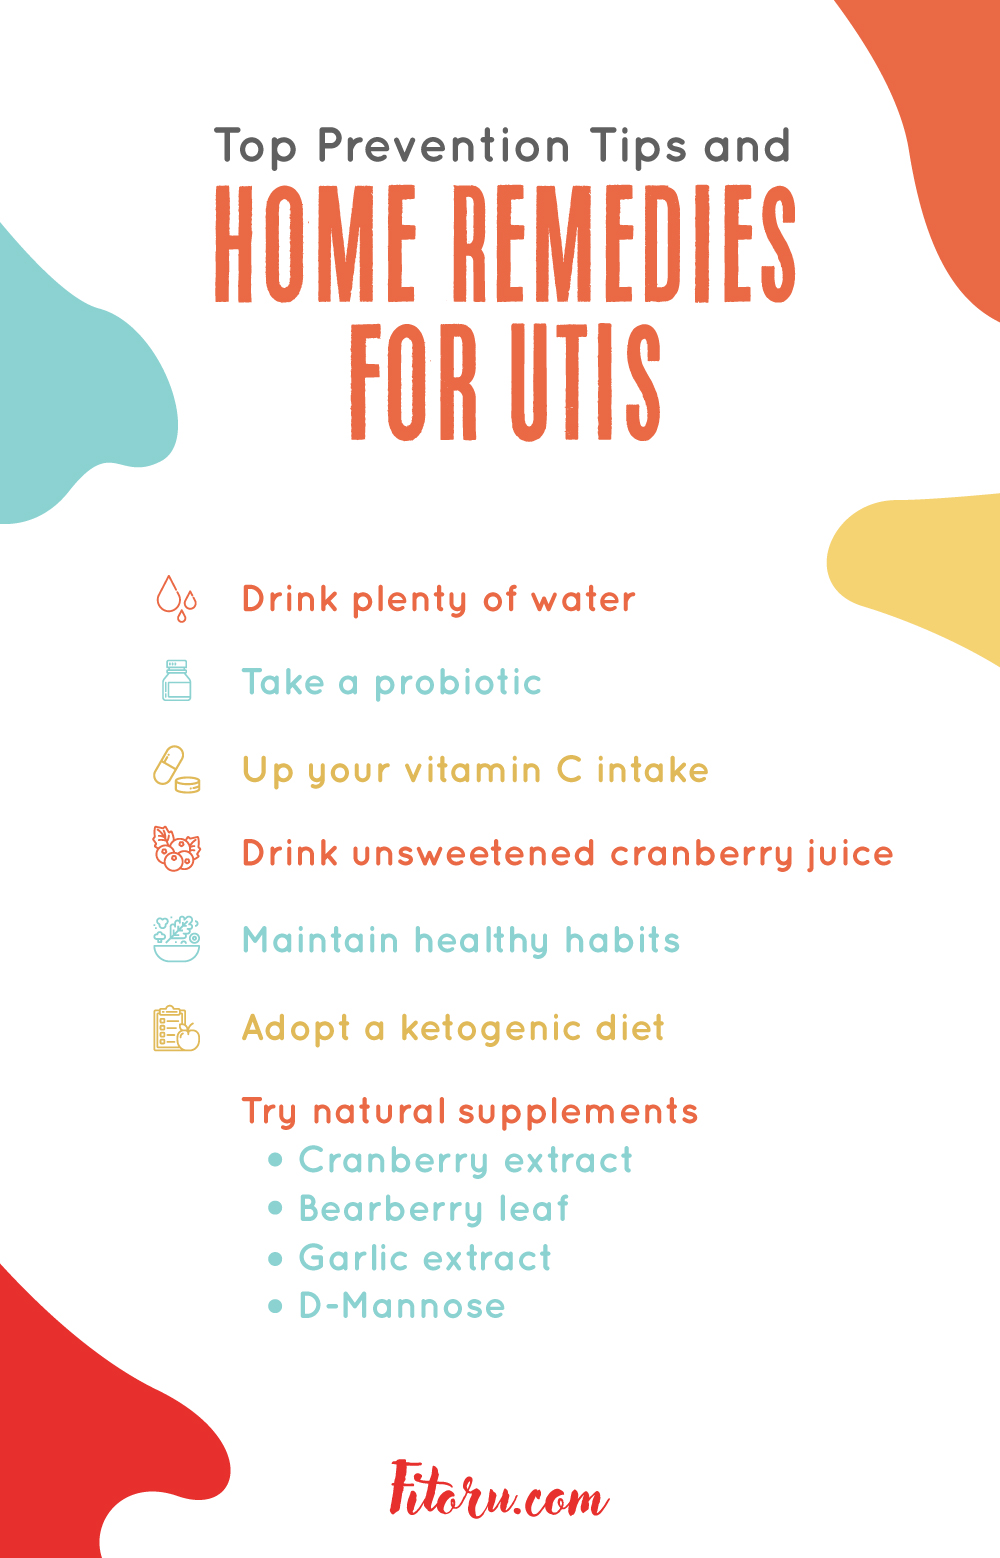 Natural home remedies for UTI treatment.